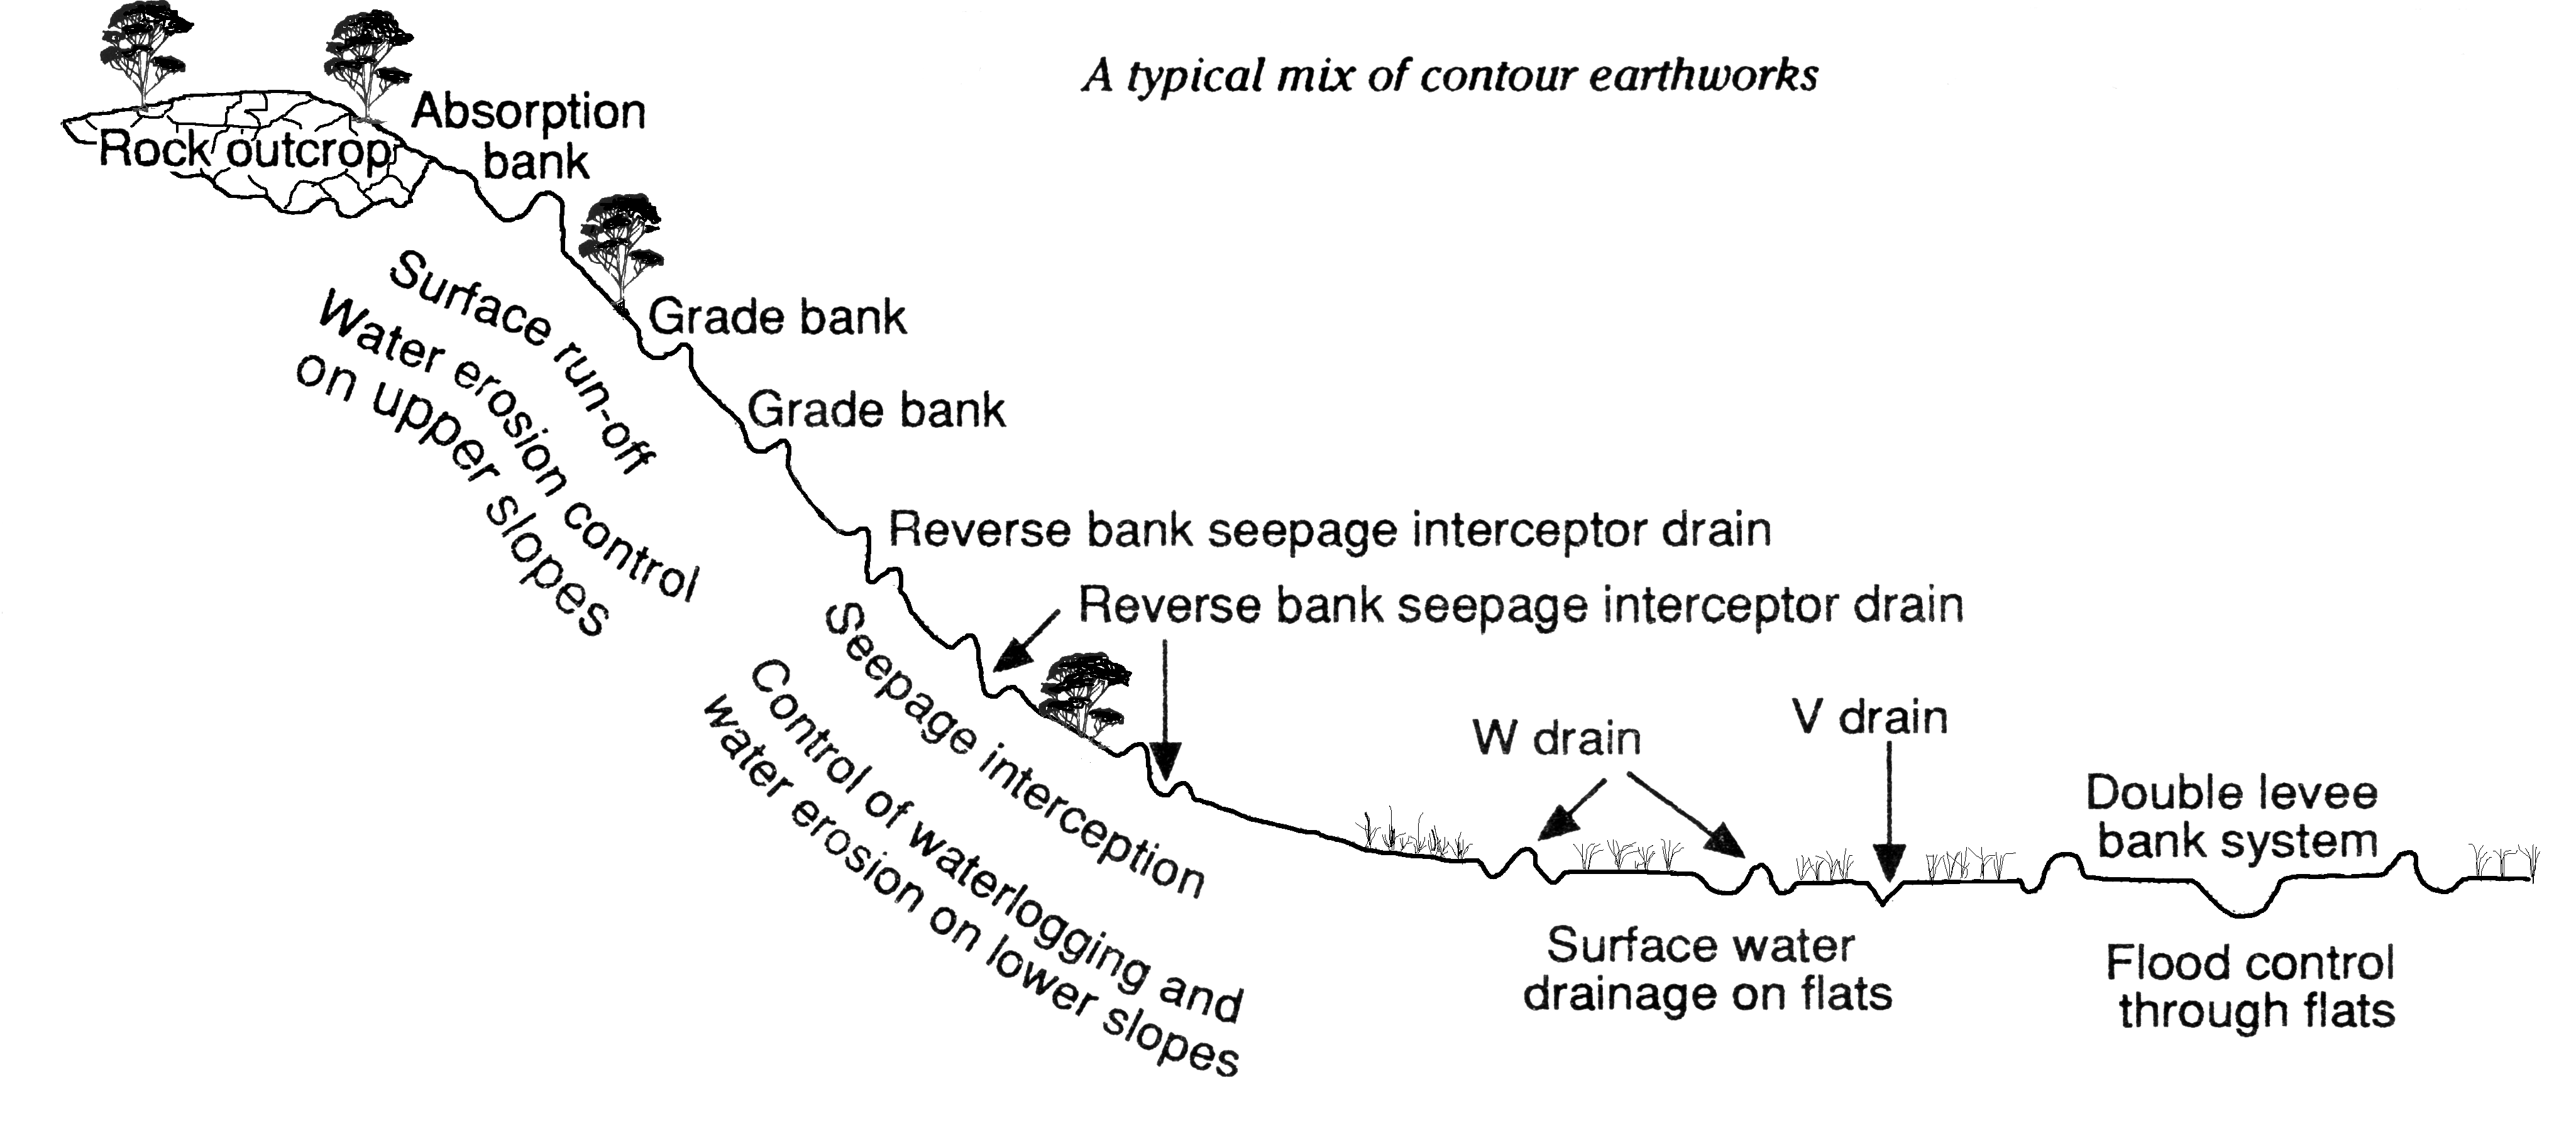 Landscape cross section showing where surface water earthwork options should be placed